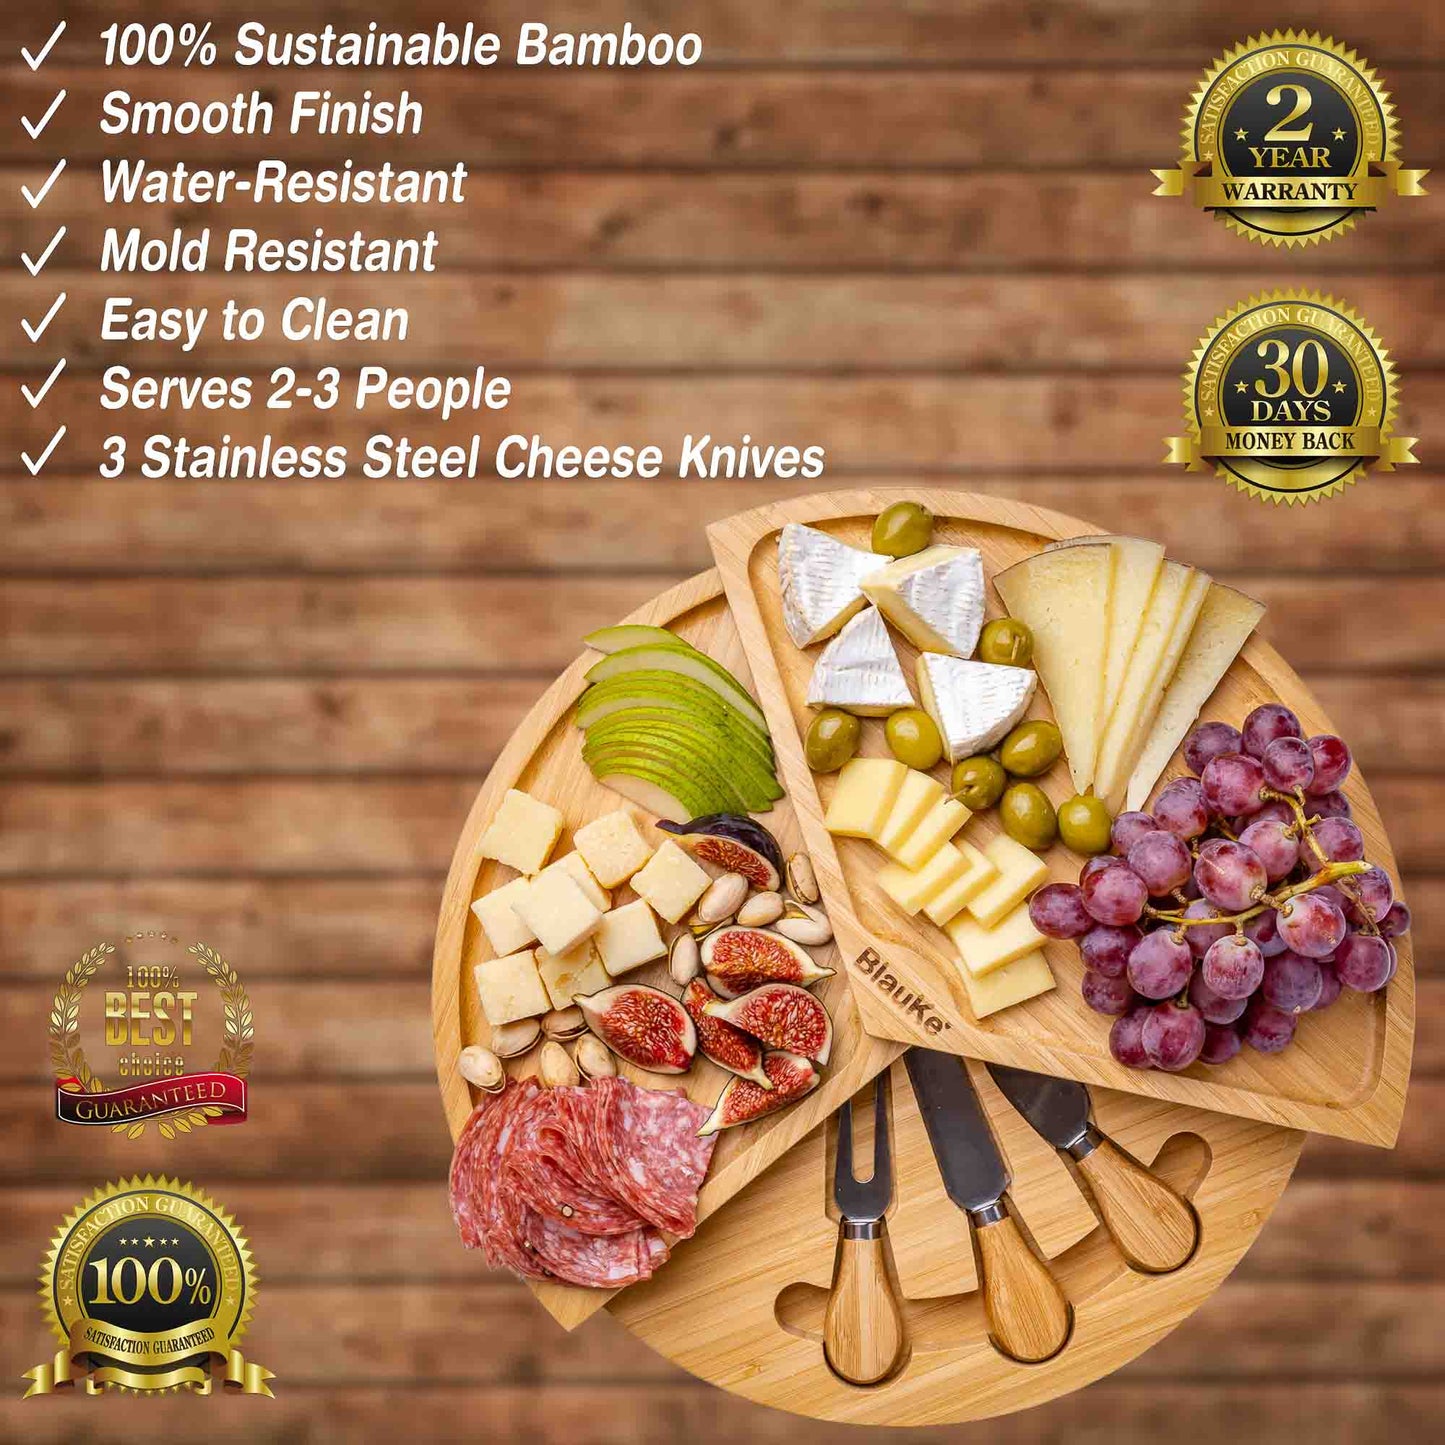 Bamboo Cheese Board and Knife Set - 14 Inch Swiveling Charcuterie Board with Slide-Out Drawer - Cheese Serving Platter, Round Serving Tray-1